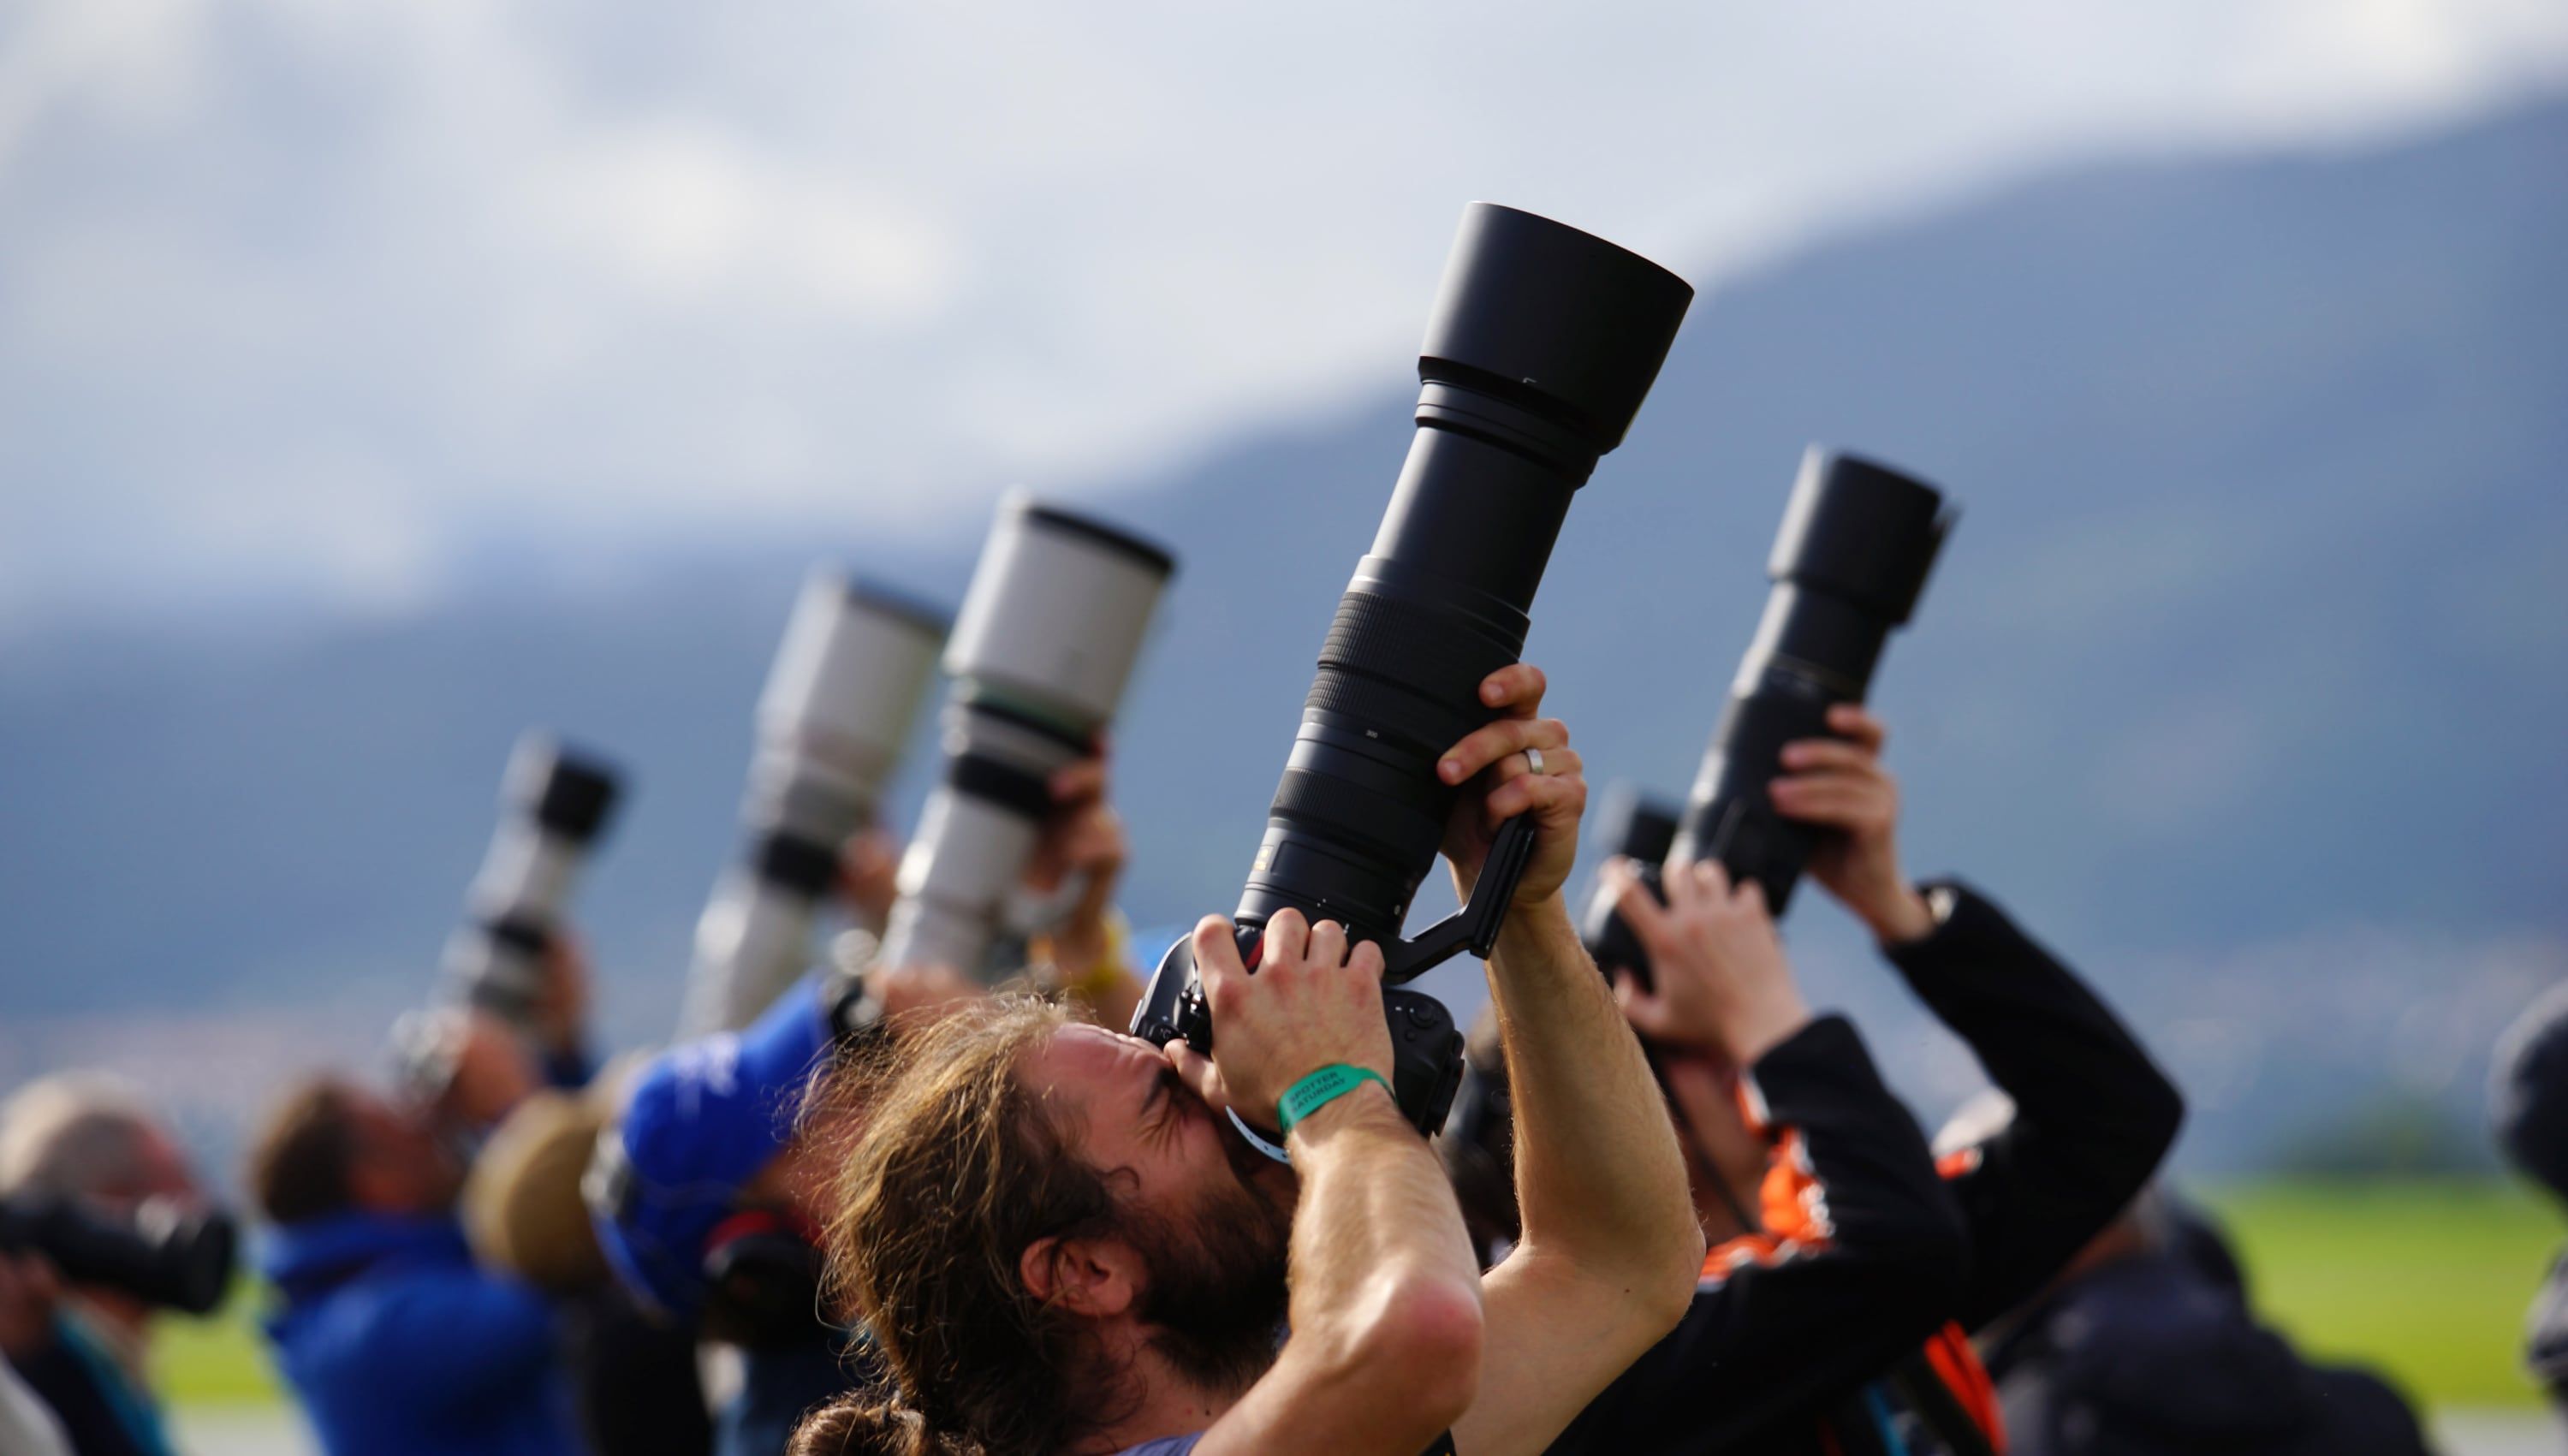 people shooting with zoom lenses